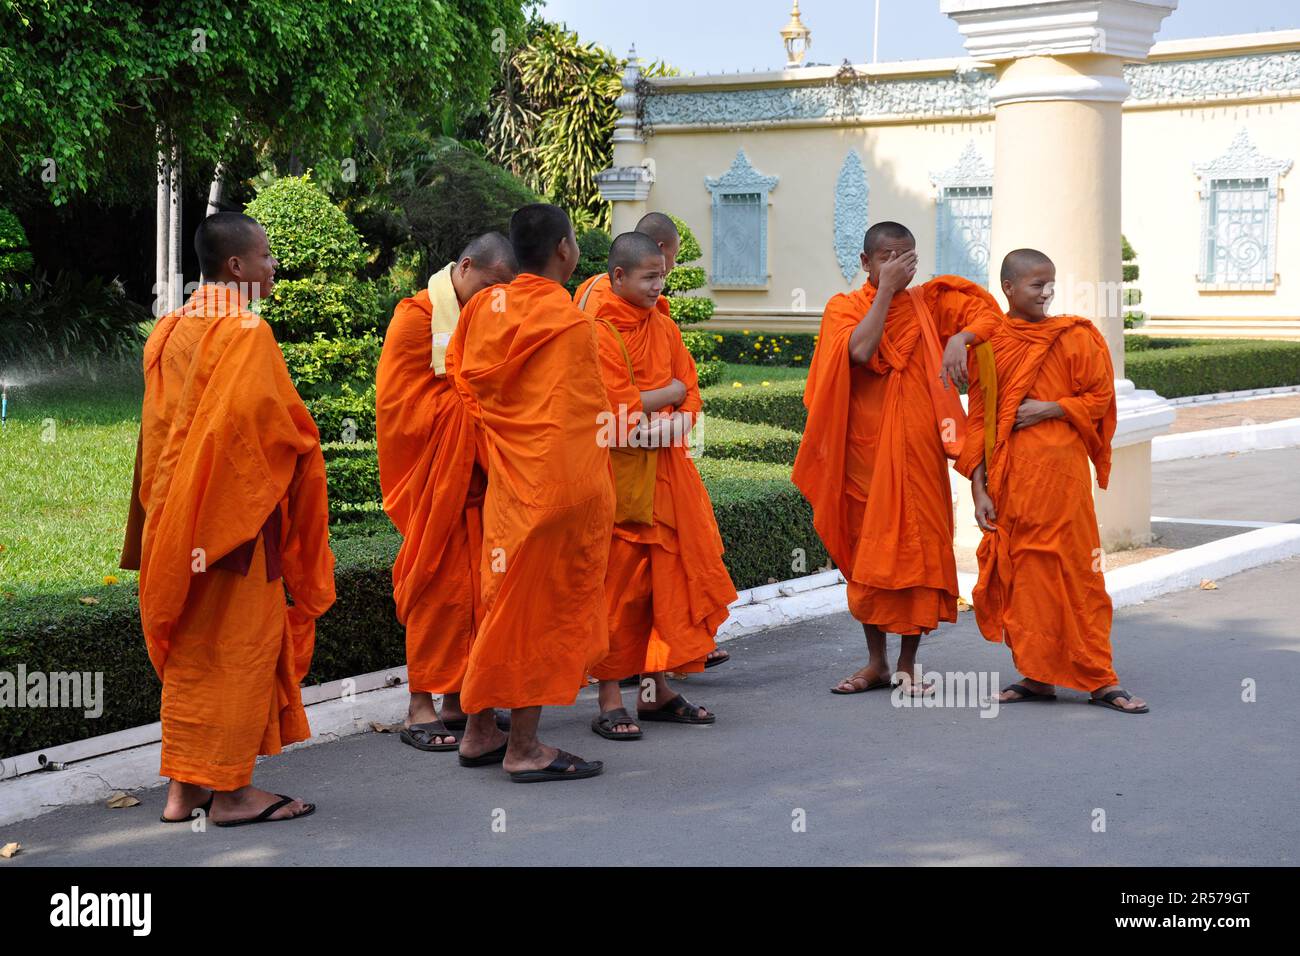 People. Pagoda. Outdoors. Horizontal. Nobody. Monks. Monk. Mekong. Kampuchea. Indoors. Indochina. Day. Geography. East. Cambodia. Asia. Silver. Phnom Penh. Religion. History. South. Traditional. Travel Stock Photo